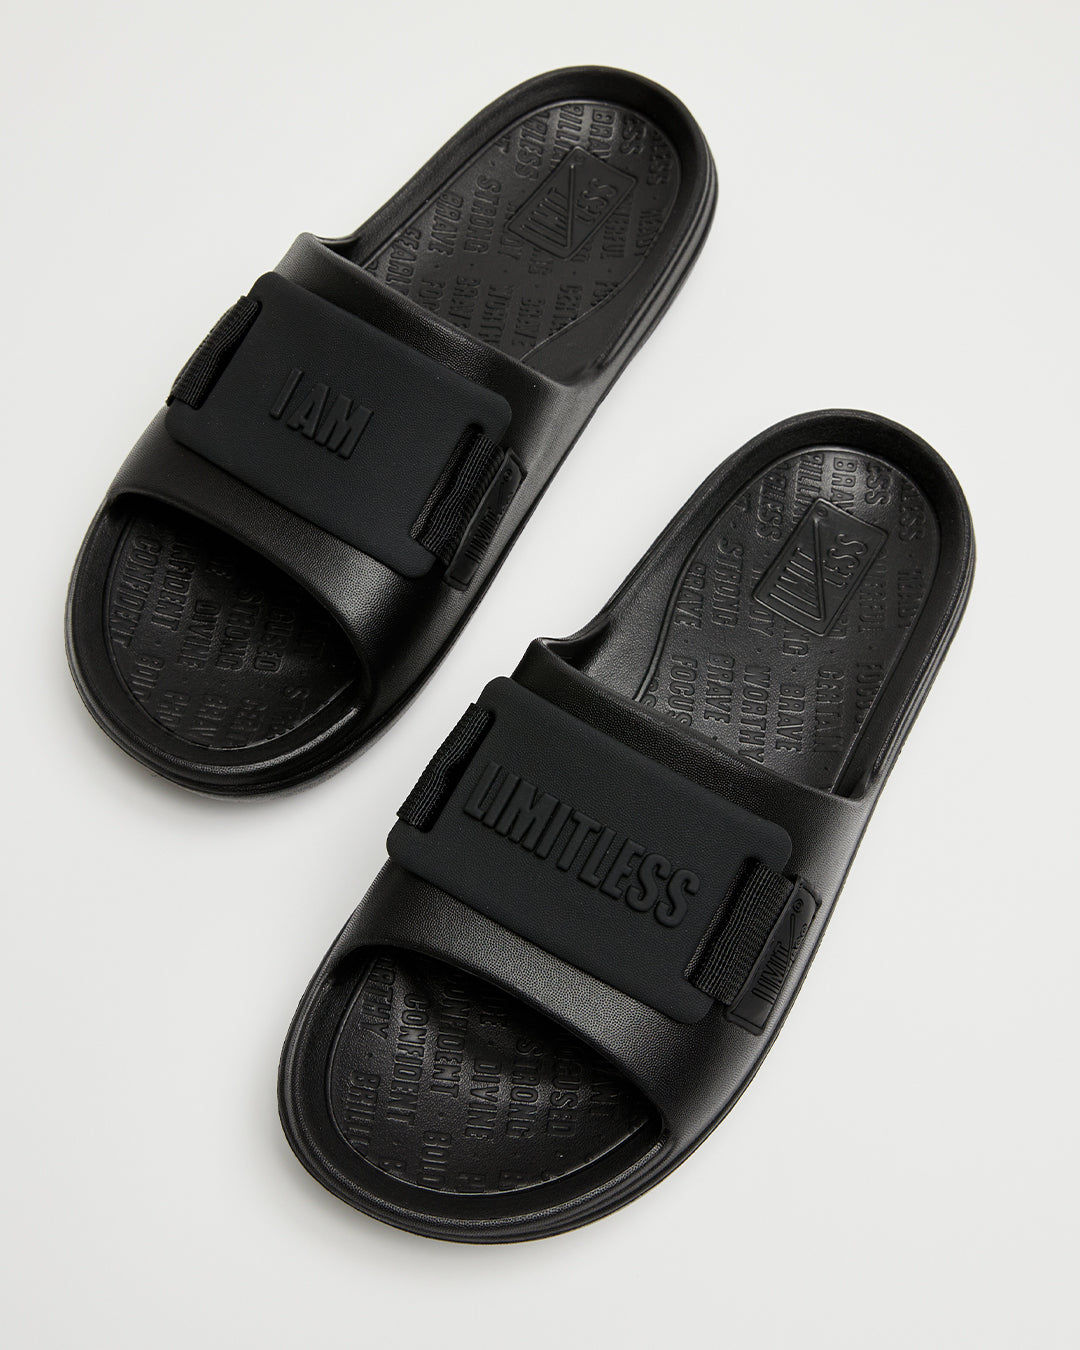 LIMITLESS SLIDES™ WITH ESSENTIAL TIBAH™ QUAD - WHITNEY YOUNG POMS EDITION